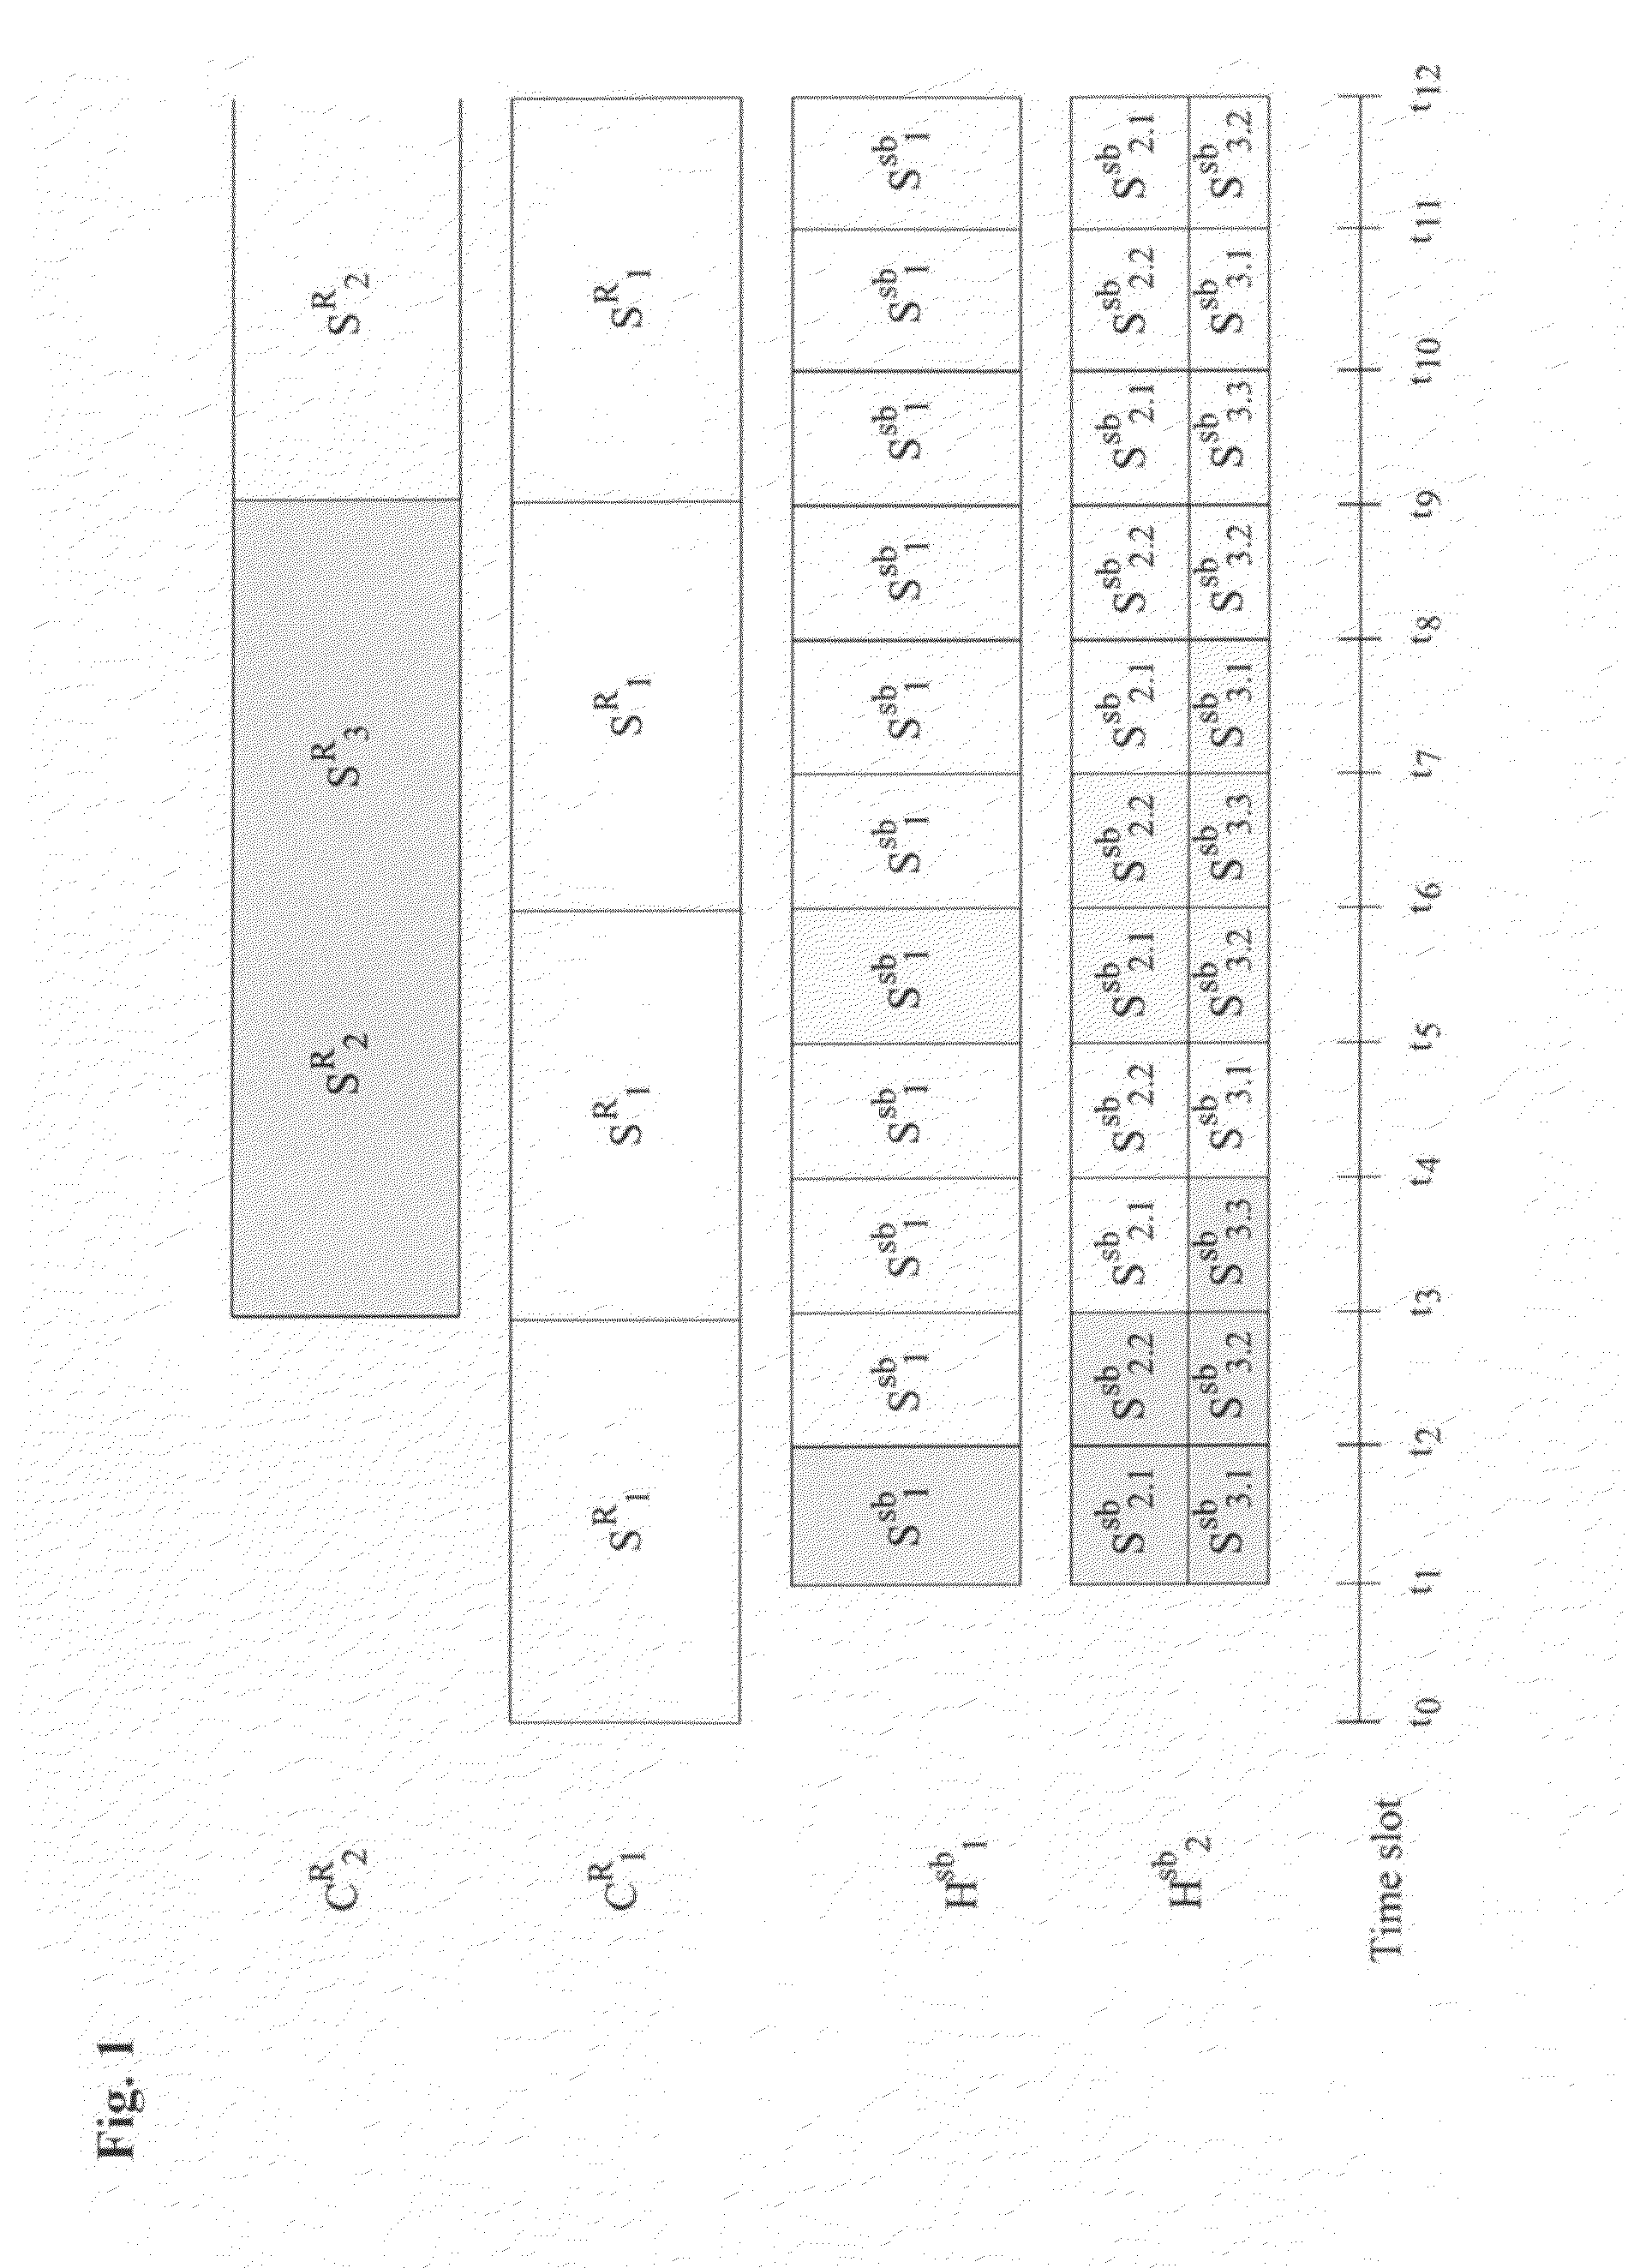 METHOD FOR TRANSMITTING NEAR VIDEO ON DEMAND (NVoD) USING CATCH AND REST (CAR) AND SUB-CHANNELS